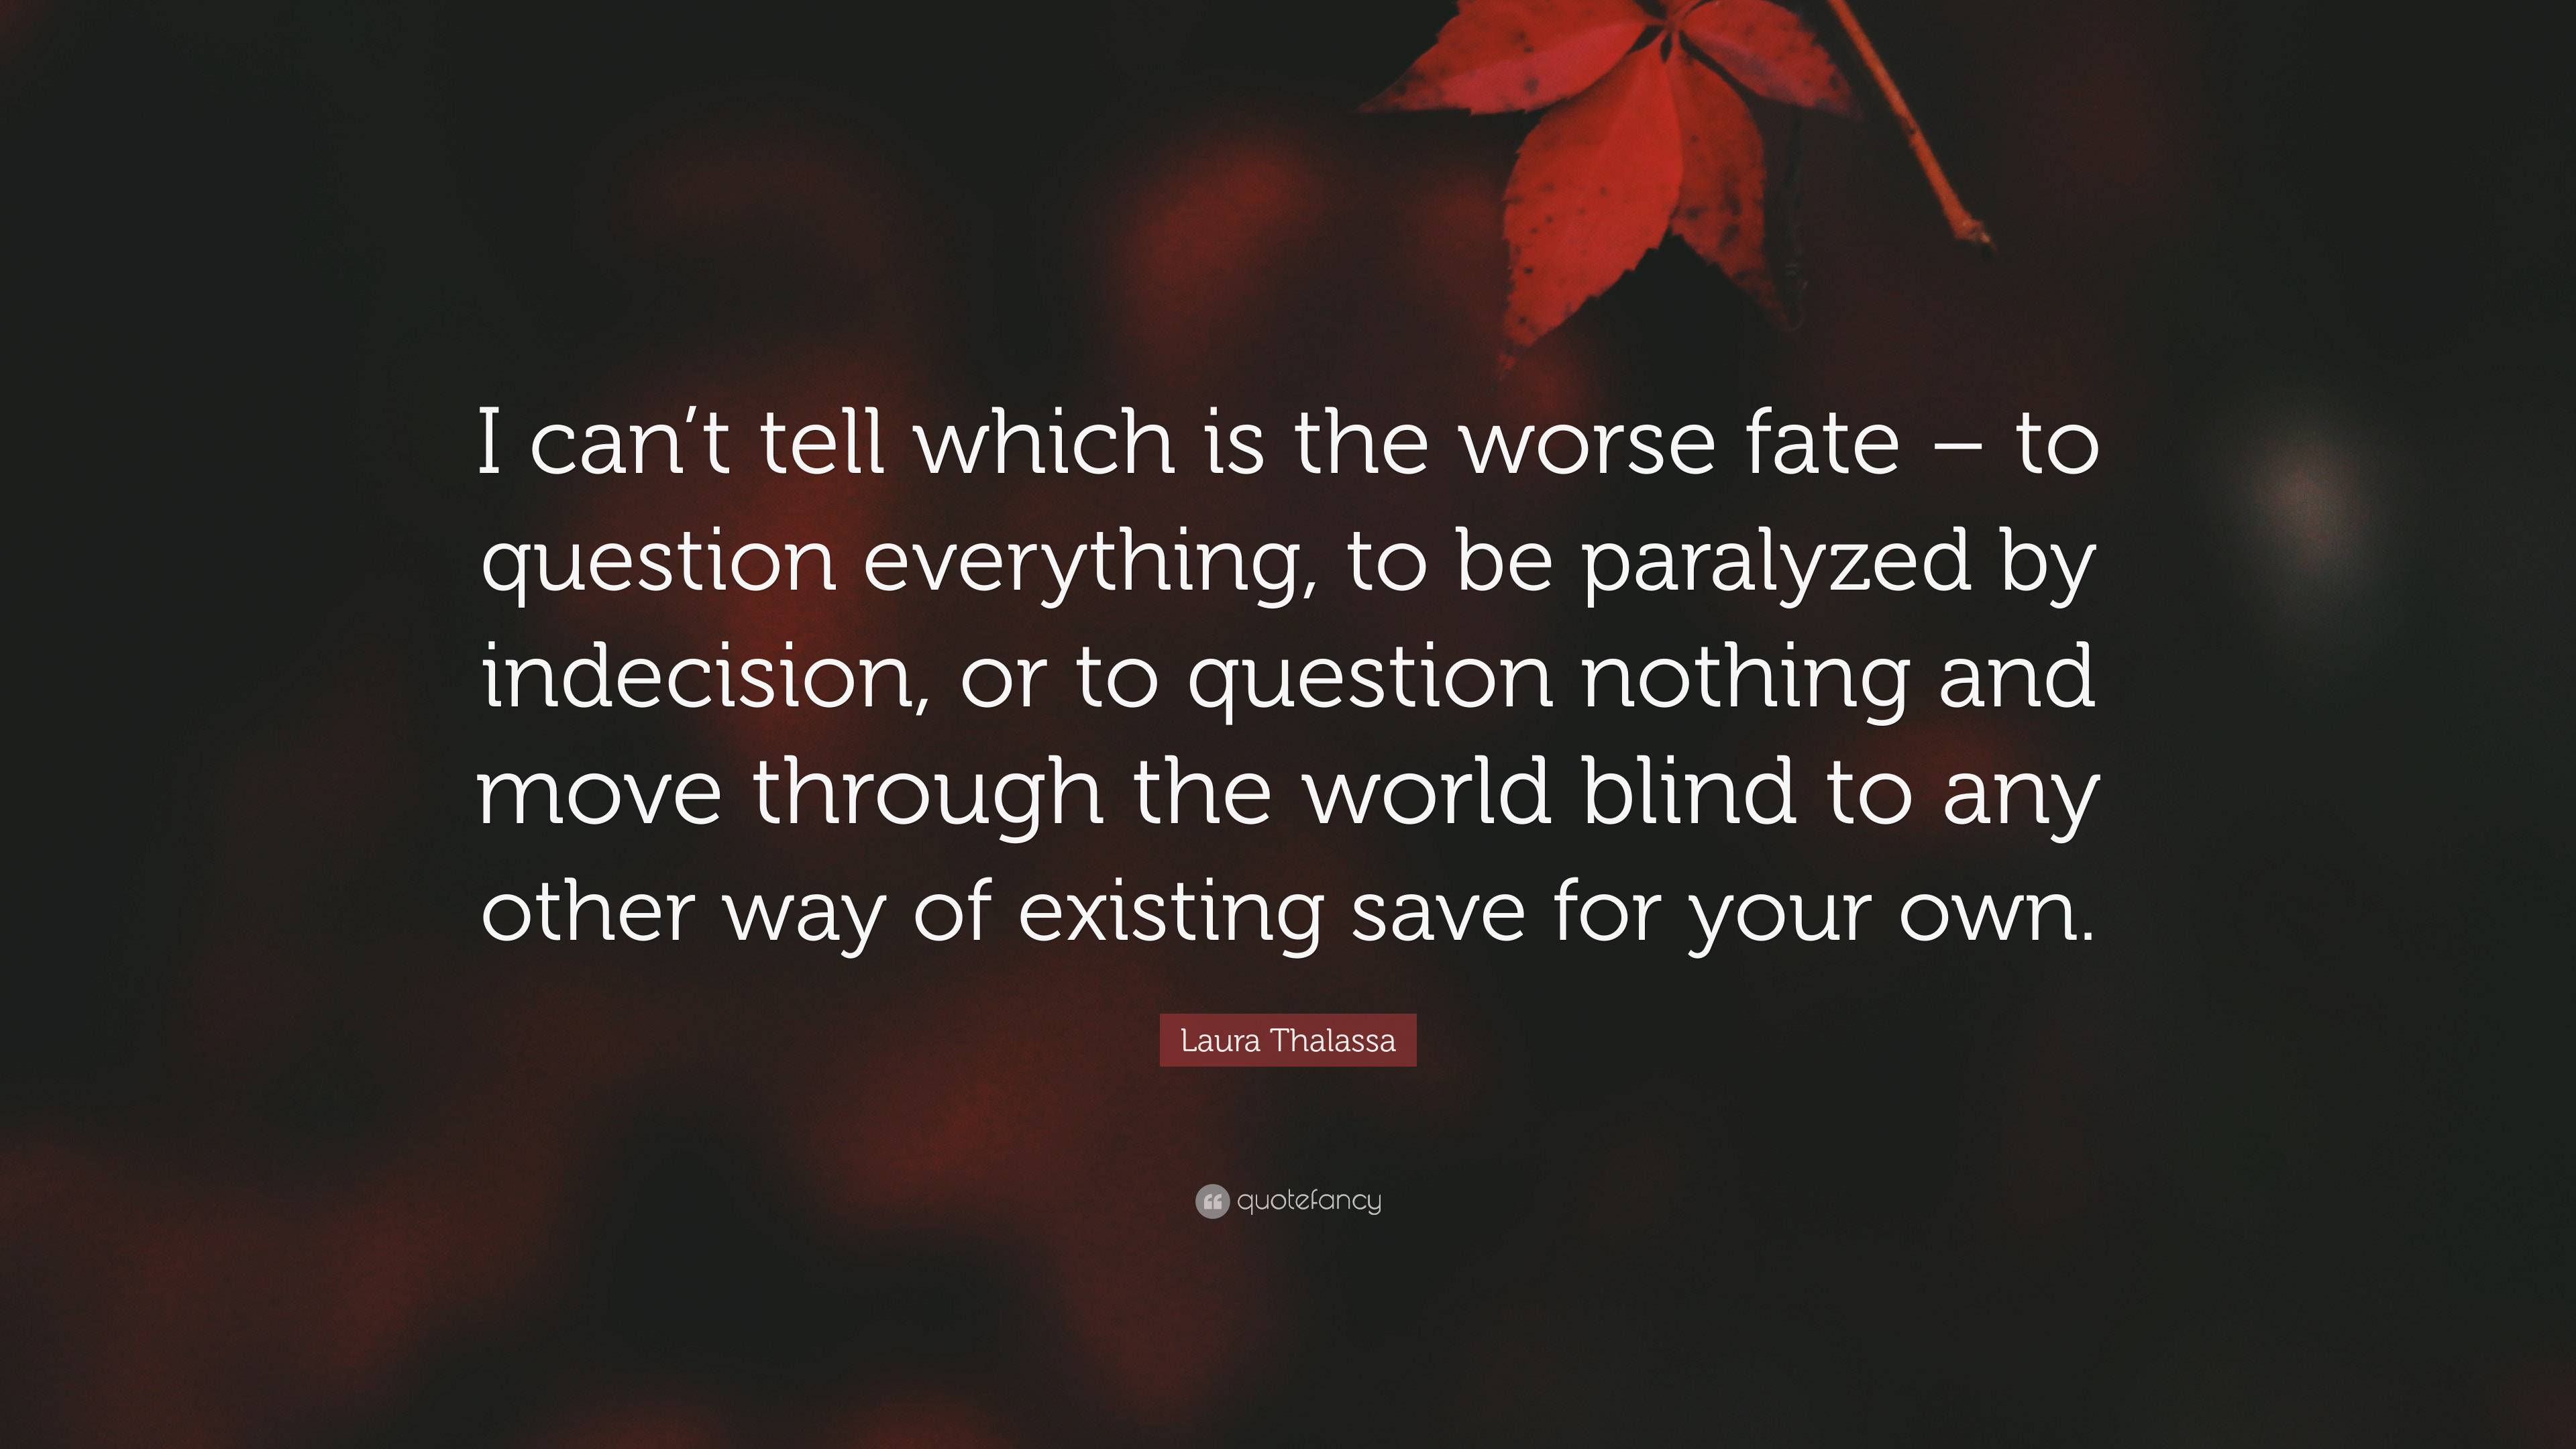 Laura Thalassa Quote: “I can’t tell which is the worse fate – to ...